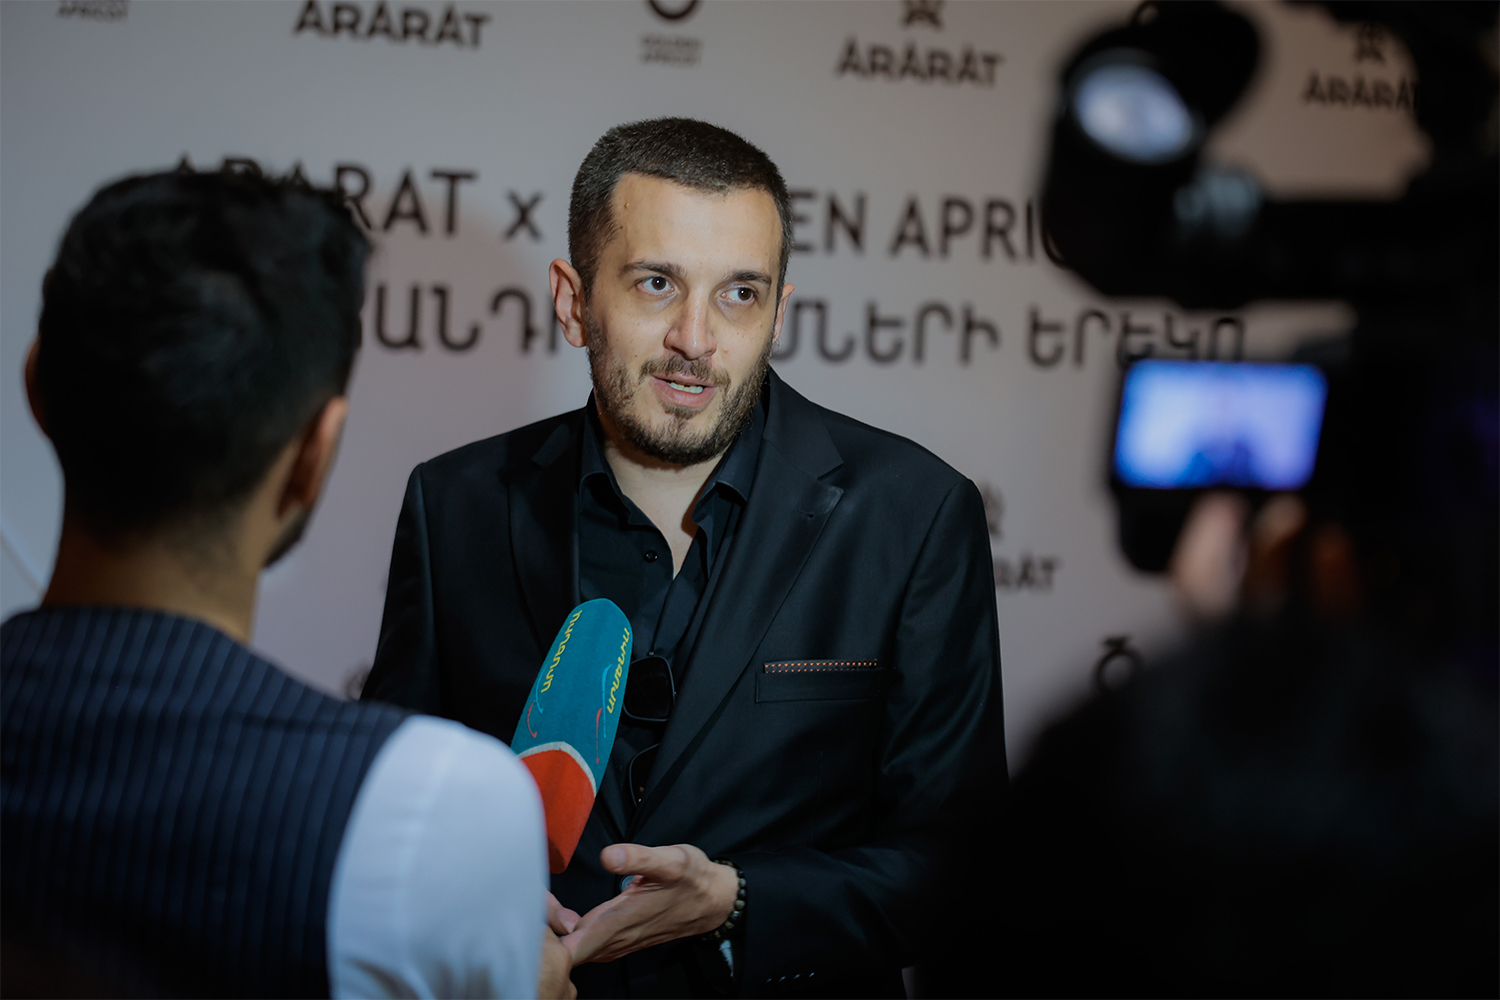 ARARAT hosted “Evening of Heartfelt Encounters” within the Golden Apricot film festival